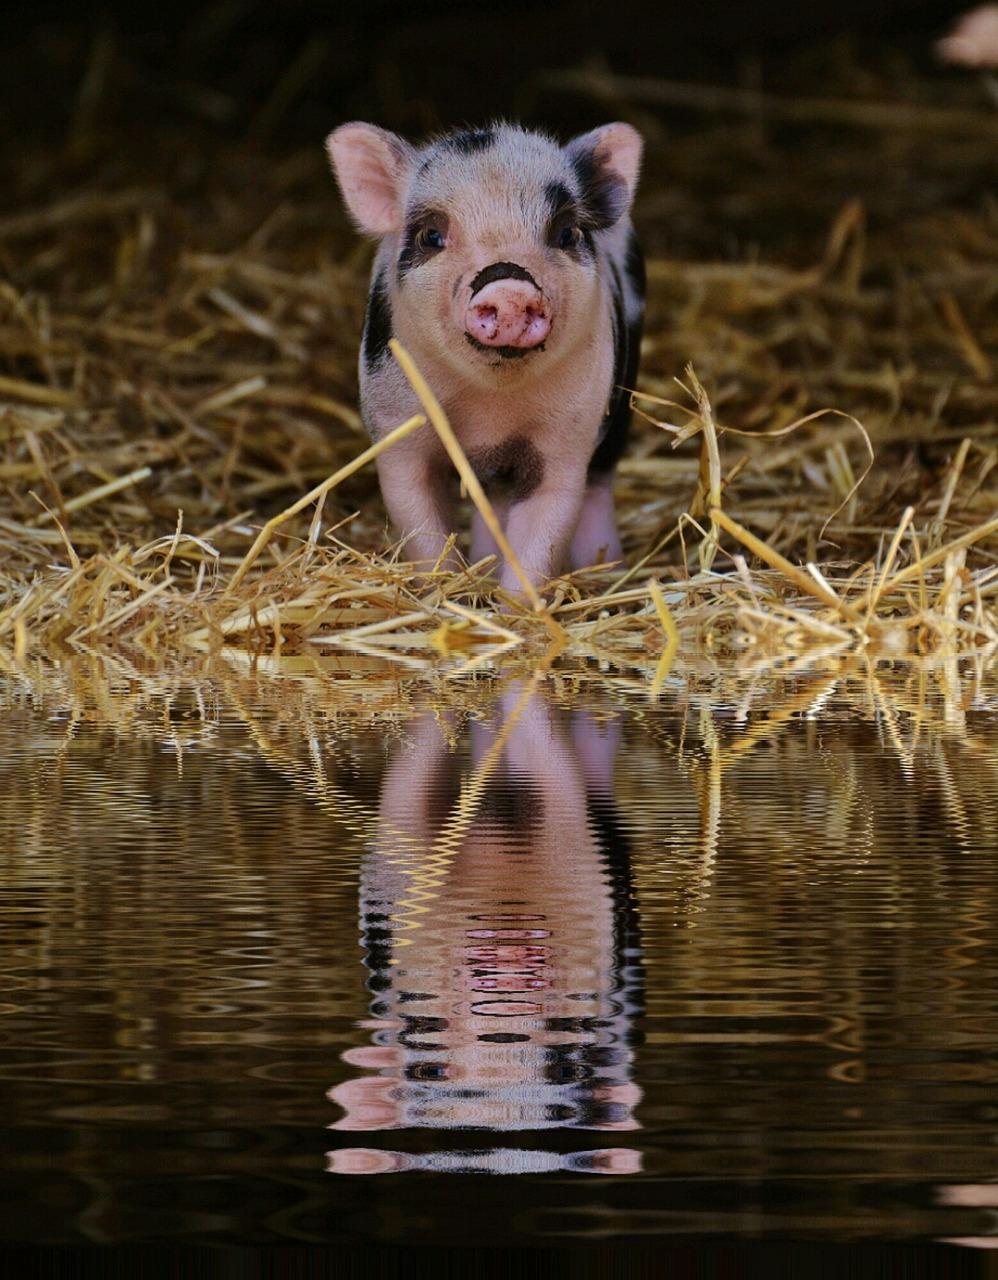 Comparing Pig Self-Awareness to Other Intelligent Animals